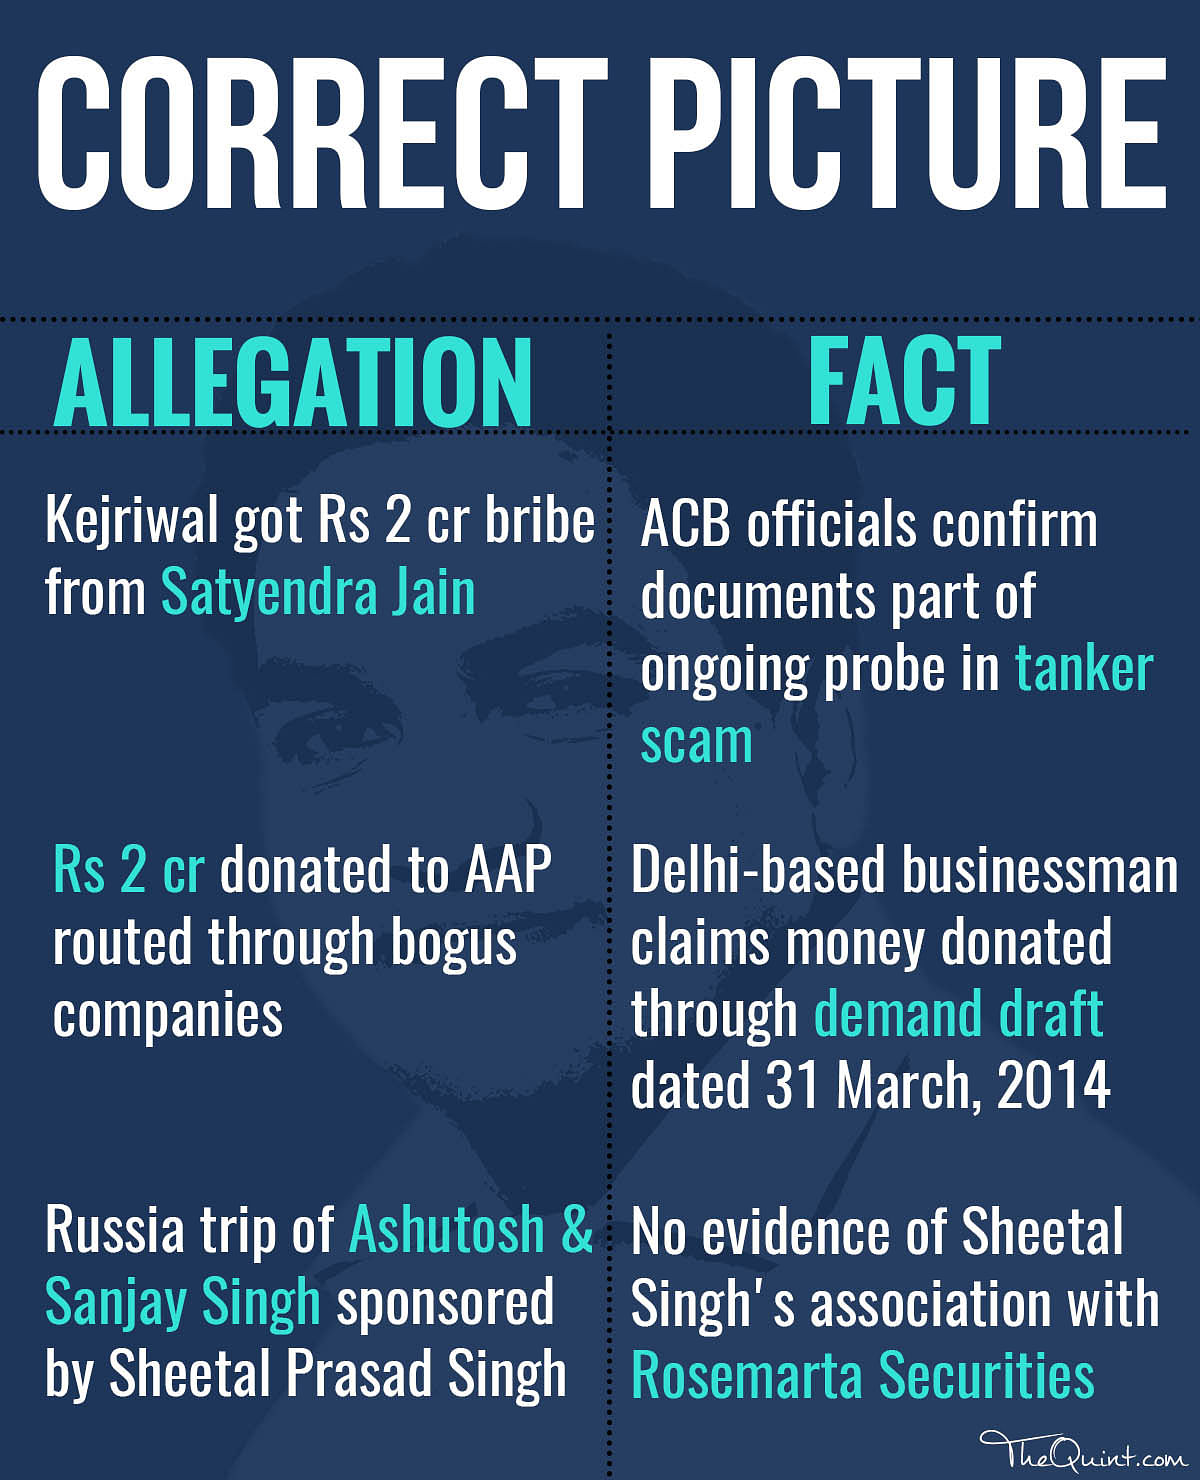 Kapil Mishra’s allegations against Delhi CM Kejriwal have not been backed by any documentary evidence.